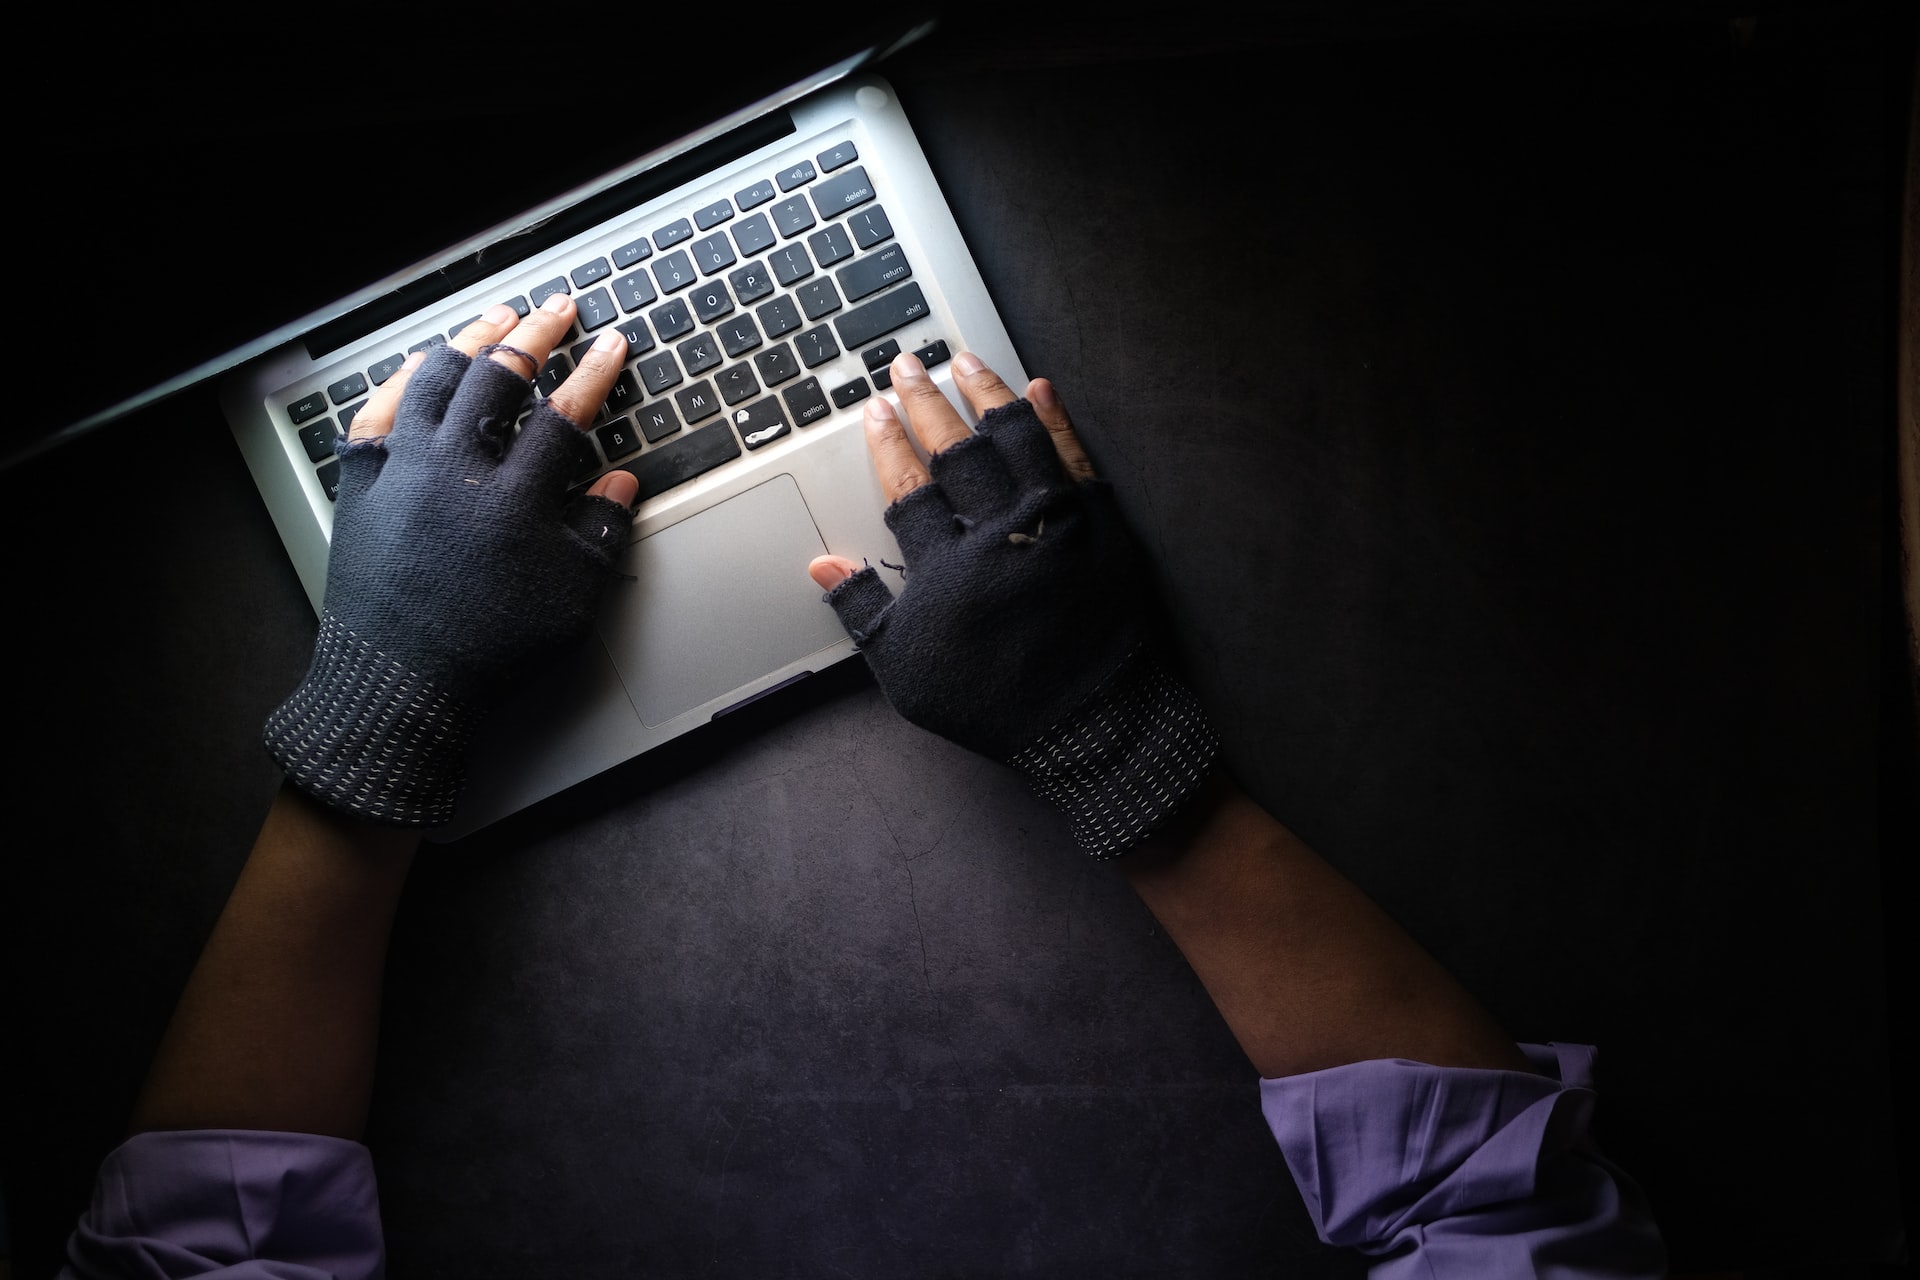 hands with gloves typing on keyboard